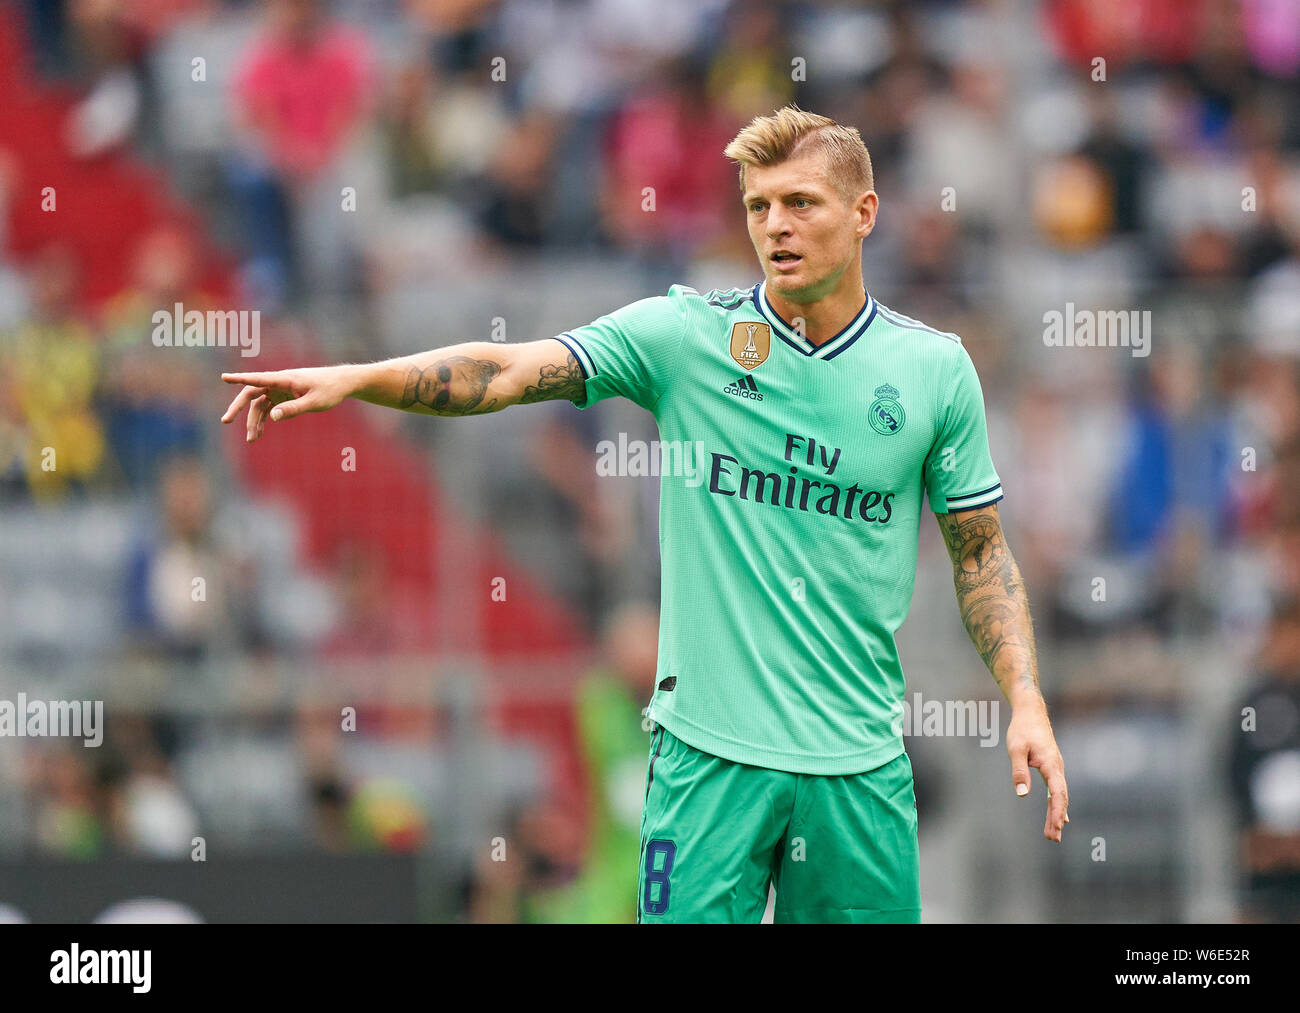 Munich, Germany. 31st July, 2019. Toni KROOS, Real Madrid 8 Gesticulate, give instructions, action, single image, gesture, hand movement, pointing, interpret, mimik, REAL MADRID - FENERBAHCE ISTANBUL 5-3 Football AUDI CUP 2019, A l l i a n z A r e n a Munich, July 31, 2019 FCB, Season 2019/2020, München Credit: Peter Schatz/Alamy Live News Stock Photo